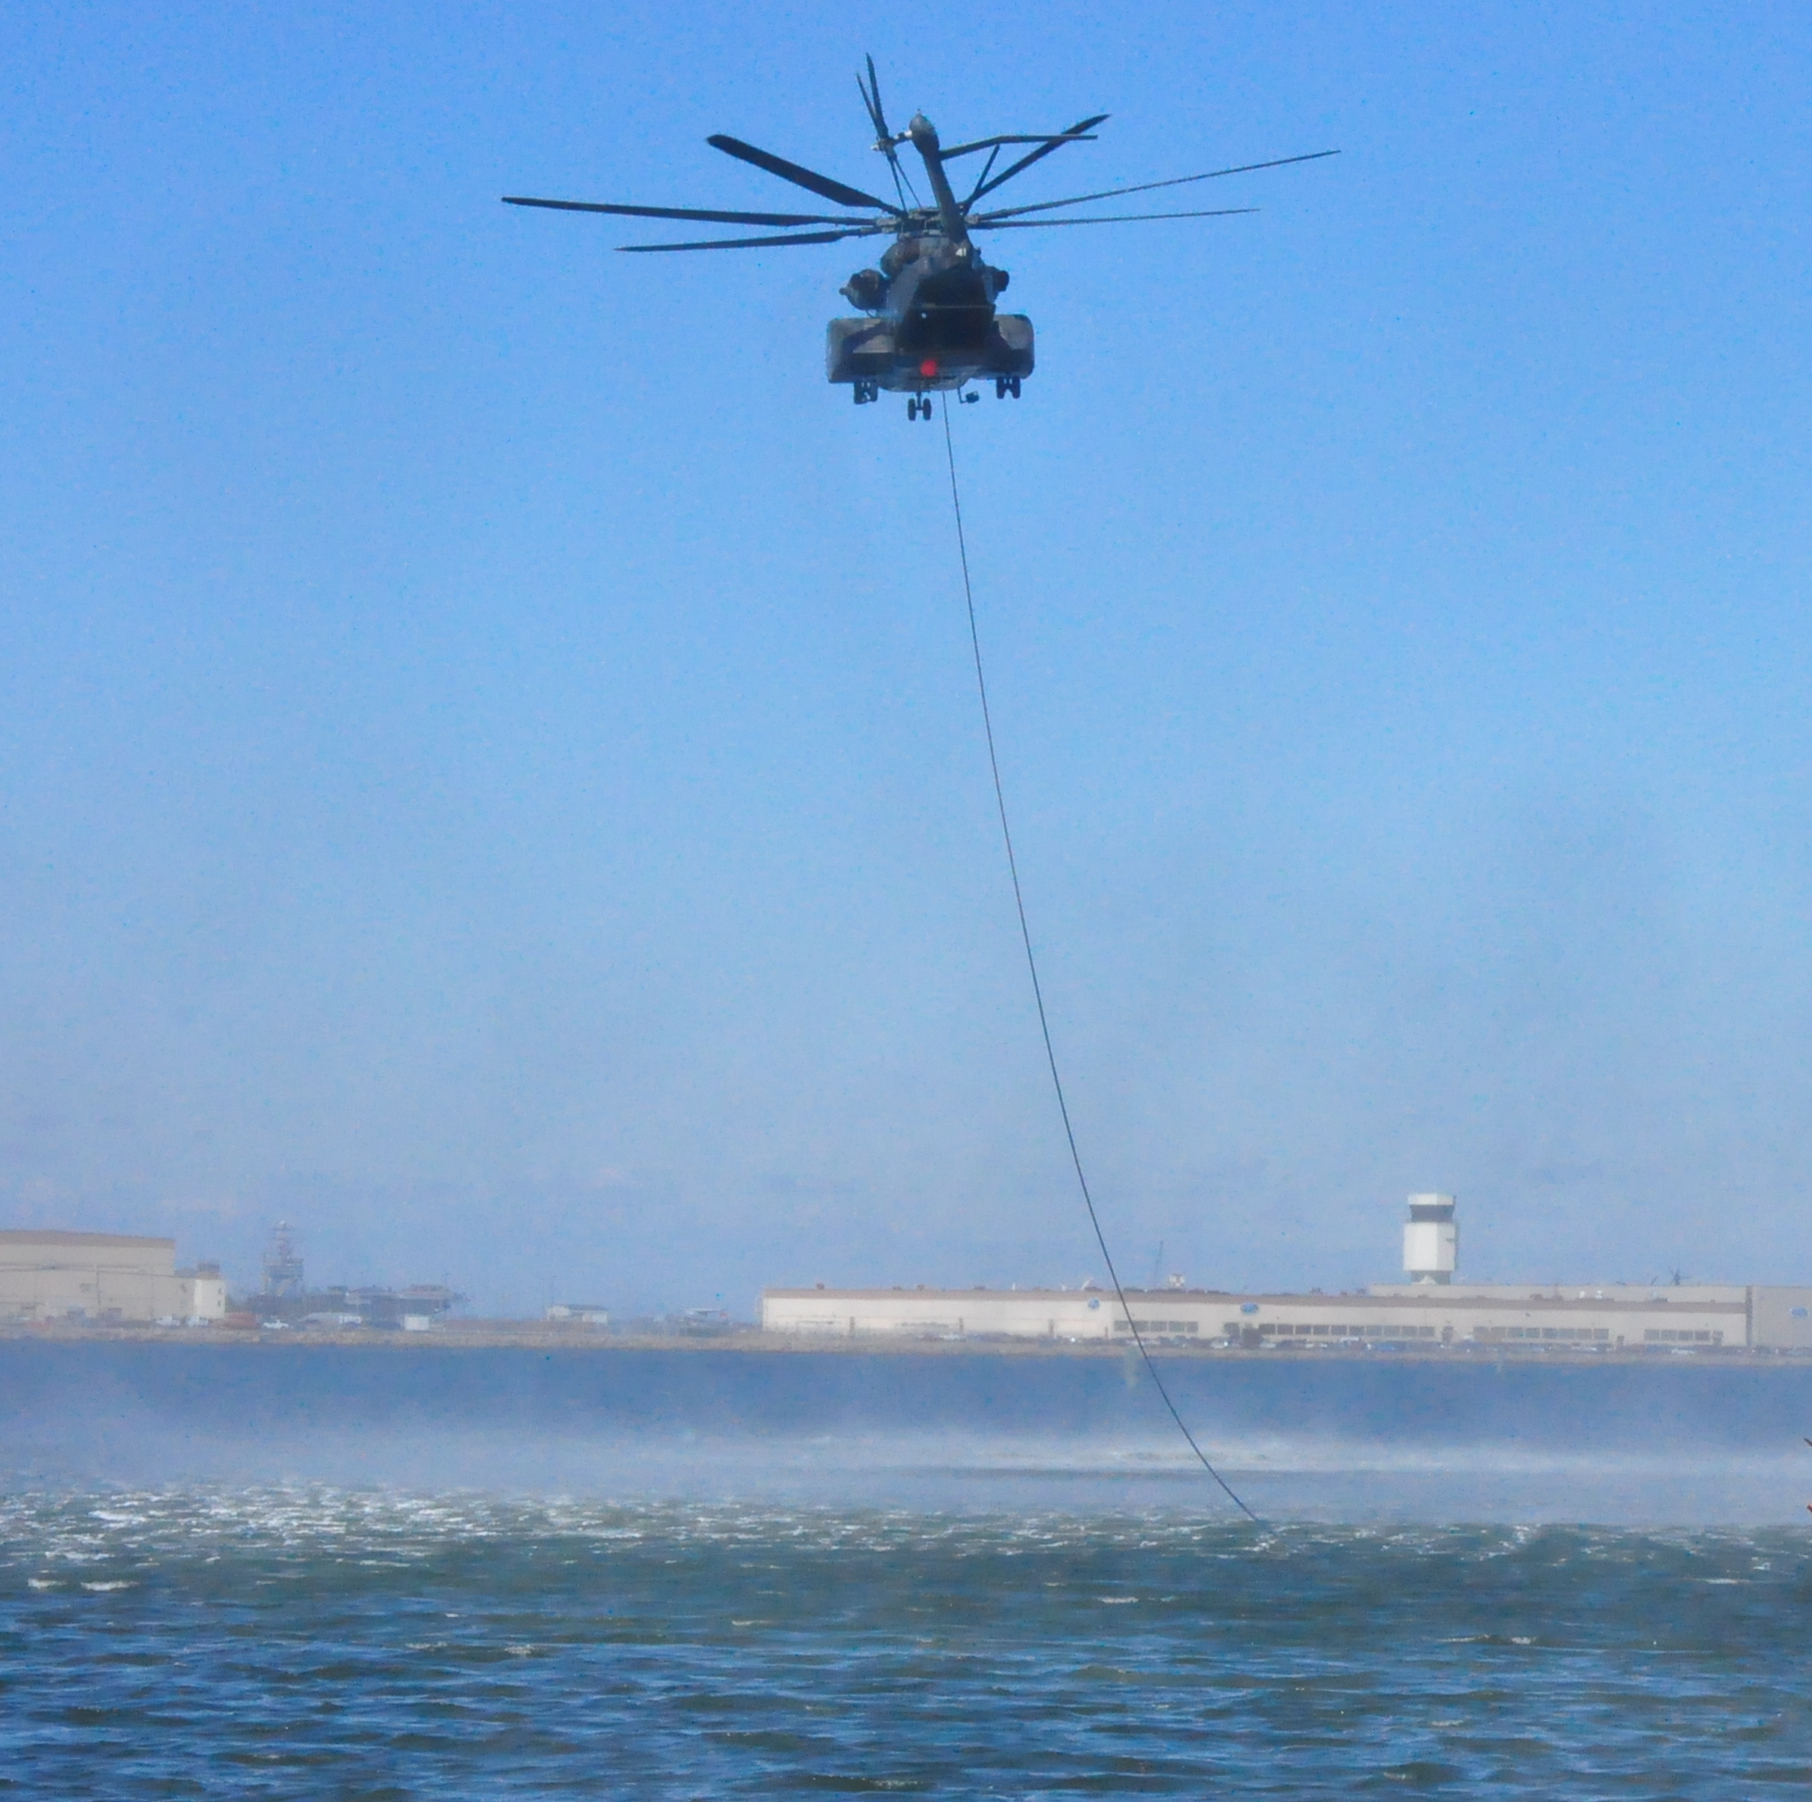 MH-53E Sea Dragon helicopter assigned to Helicopter Mine Countermeasures Squadron (HM) 14 conducts practice MK-105 mine countermeasure operations in the Chesapeake Bay in 2011. US Navy Photo